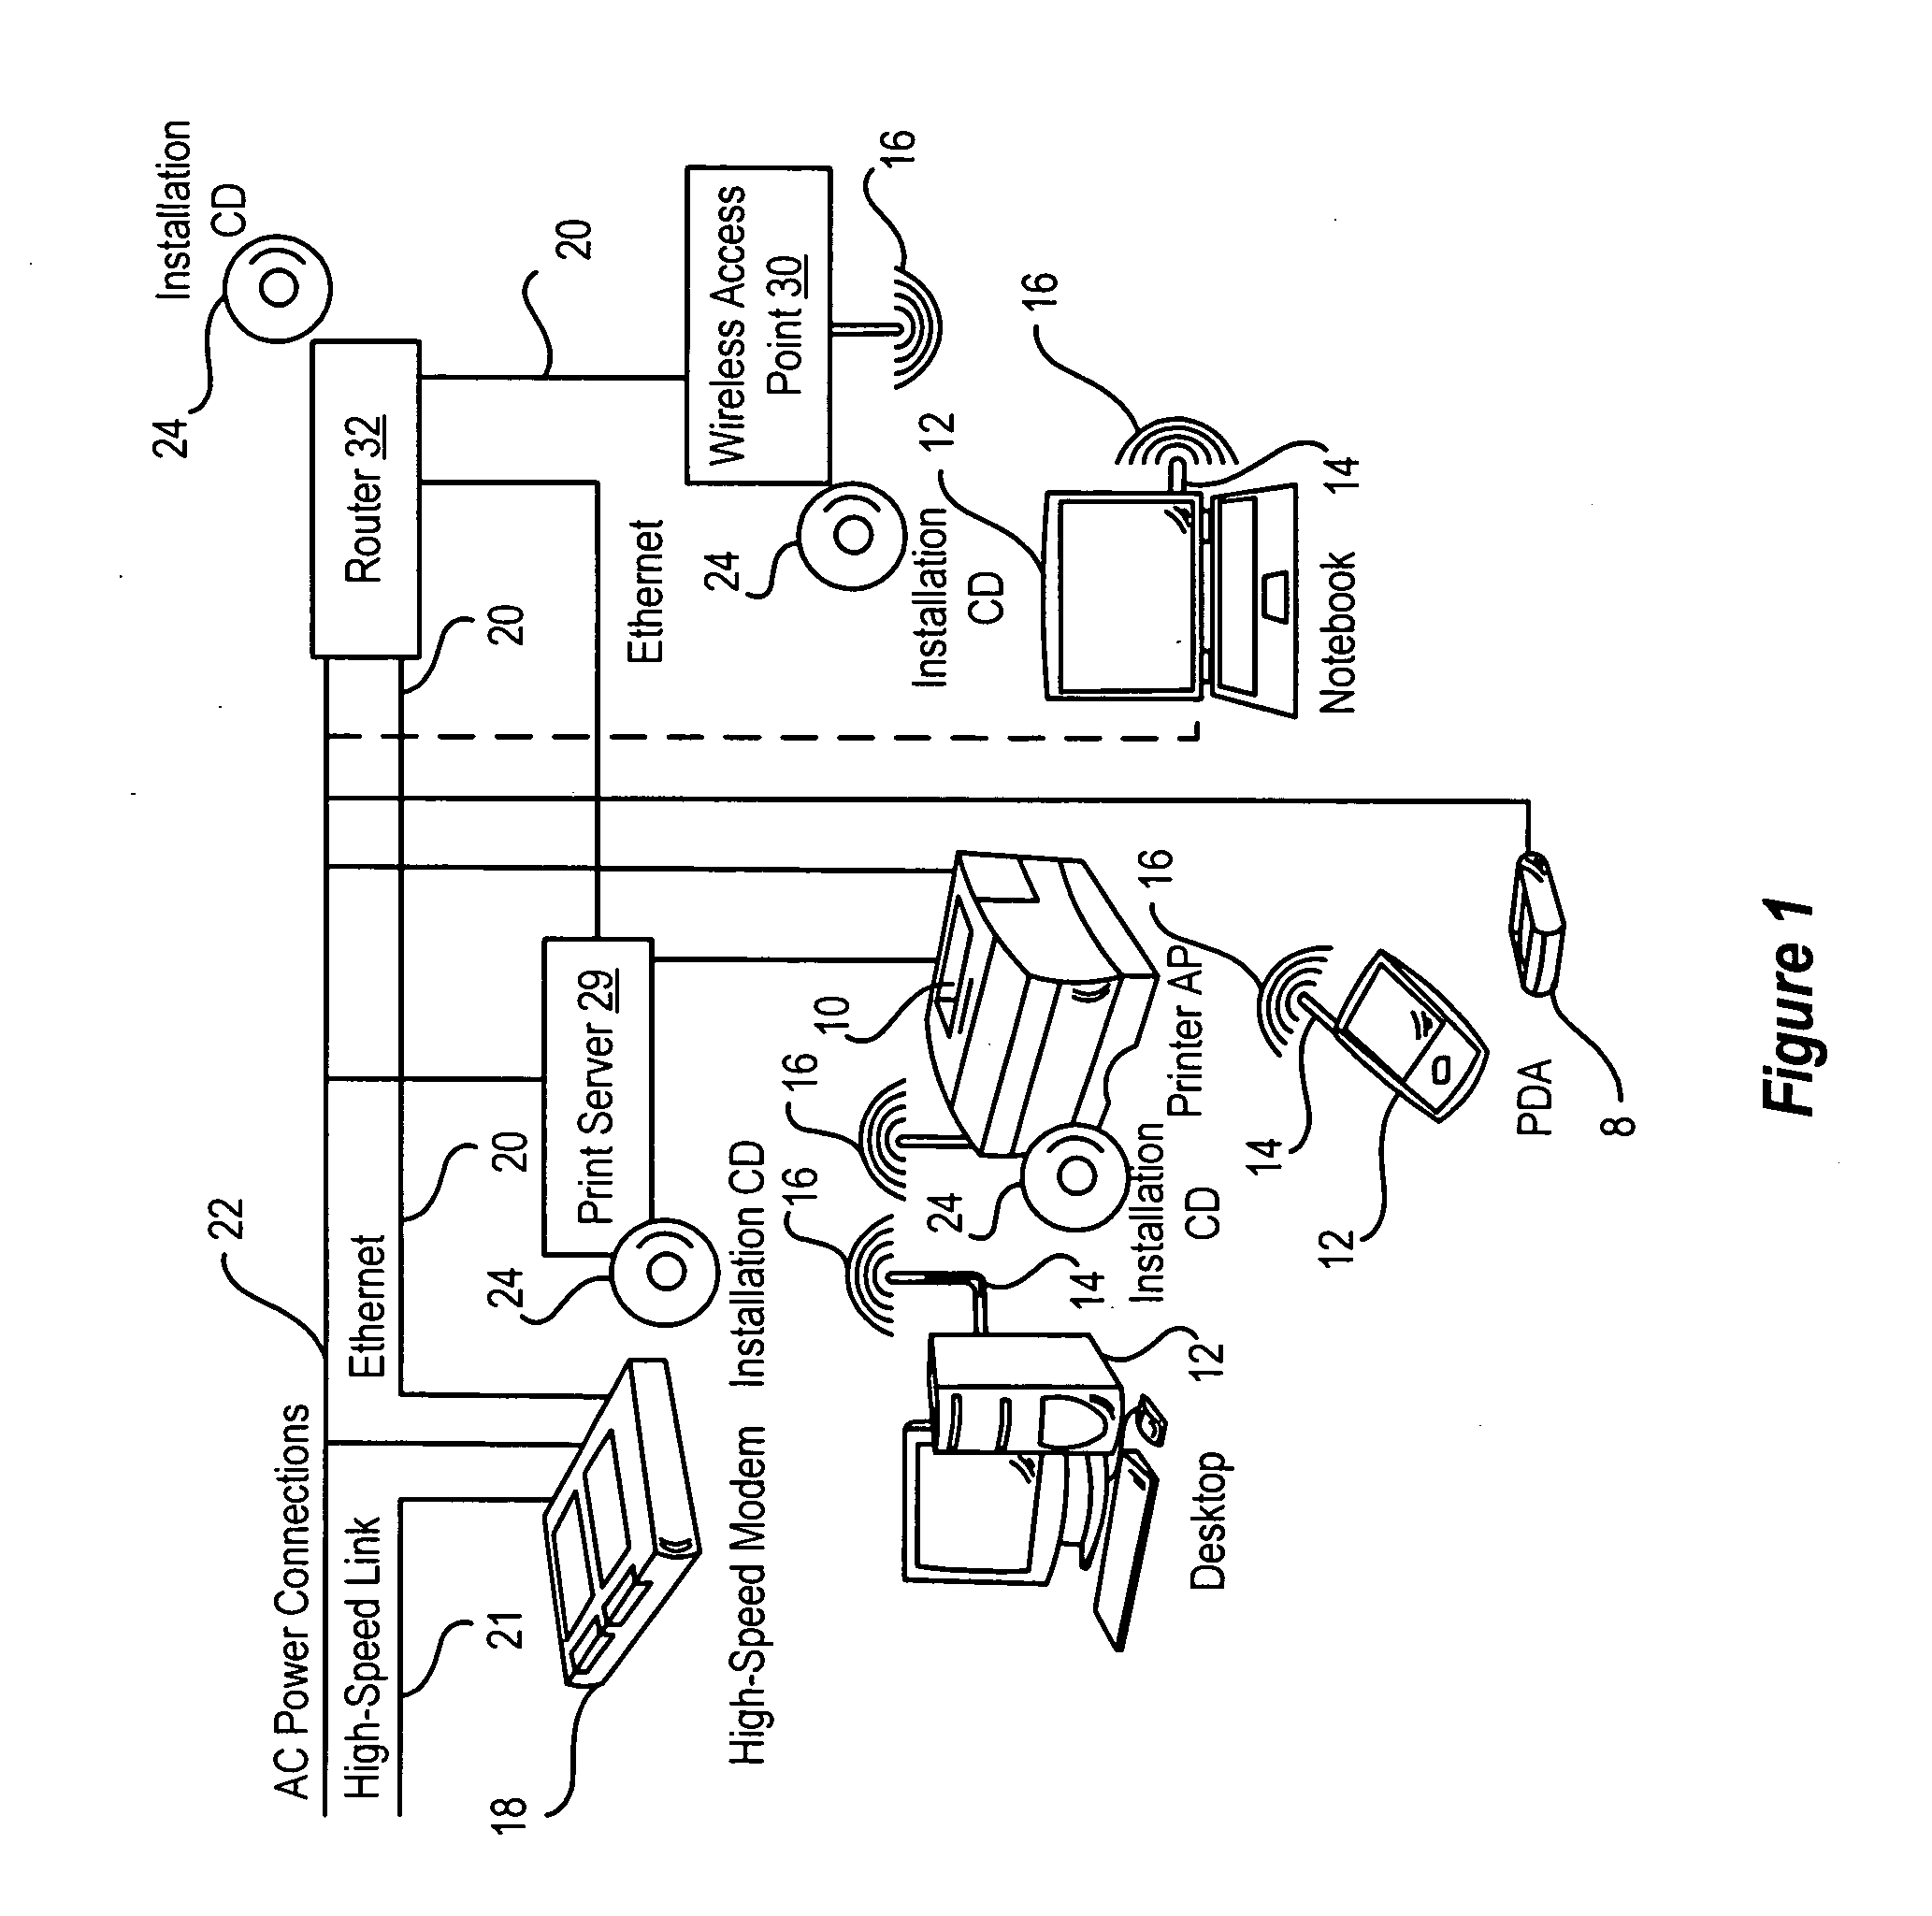 System and method for a printer access point